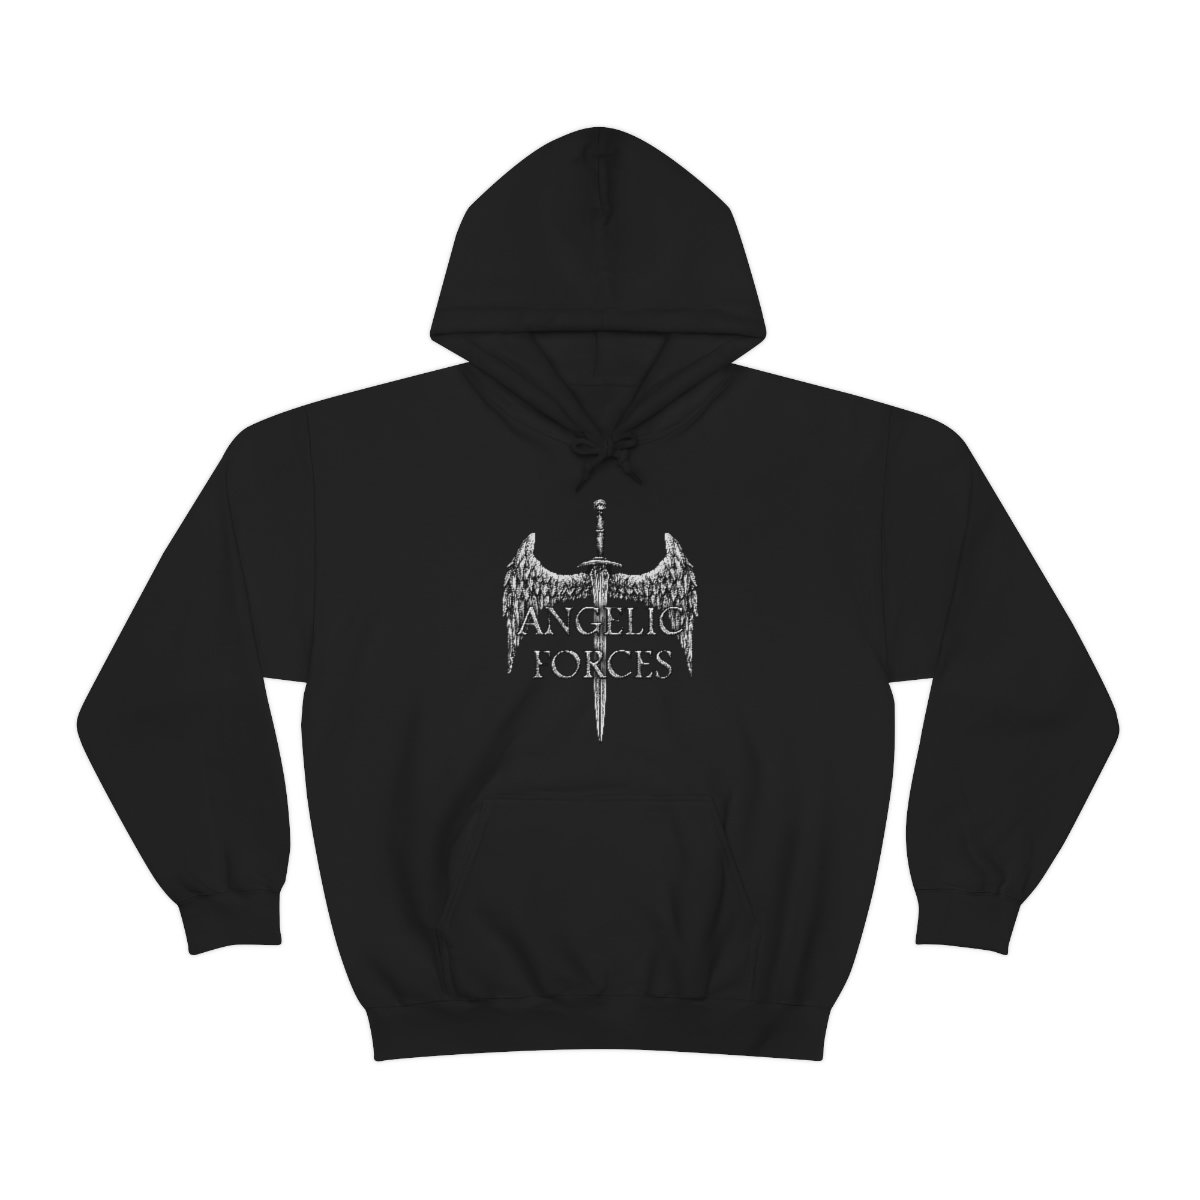 Angelic Forces Sword and Wing Pullover Hooded Sweatshirt (18500)